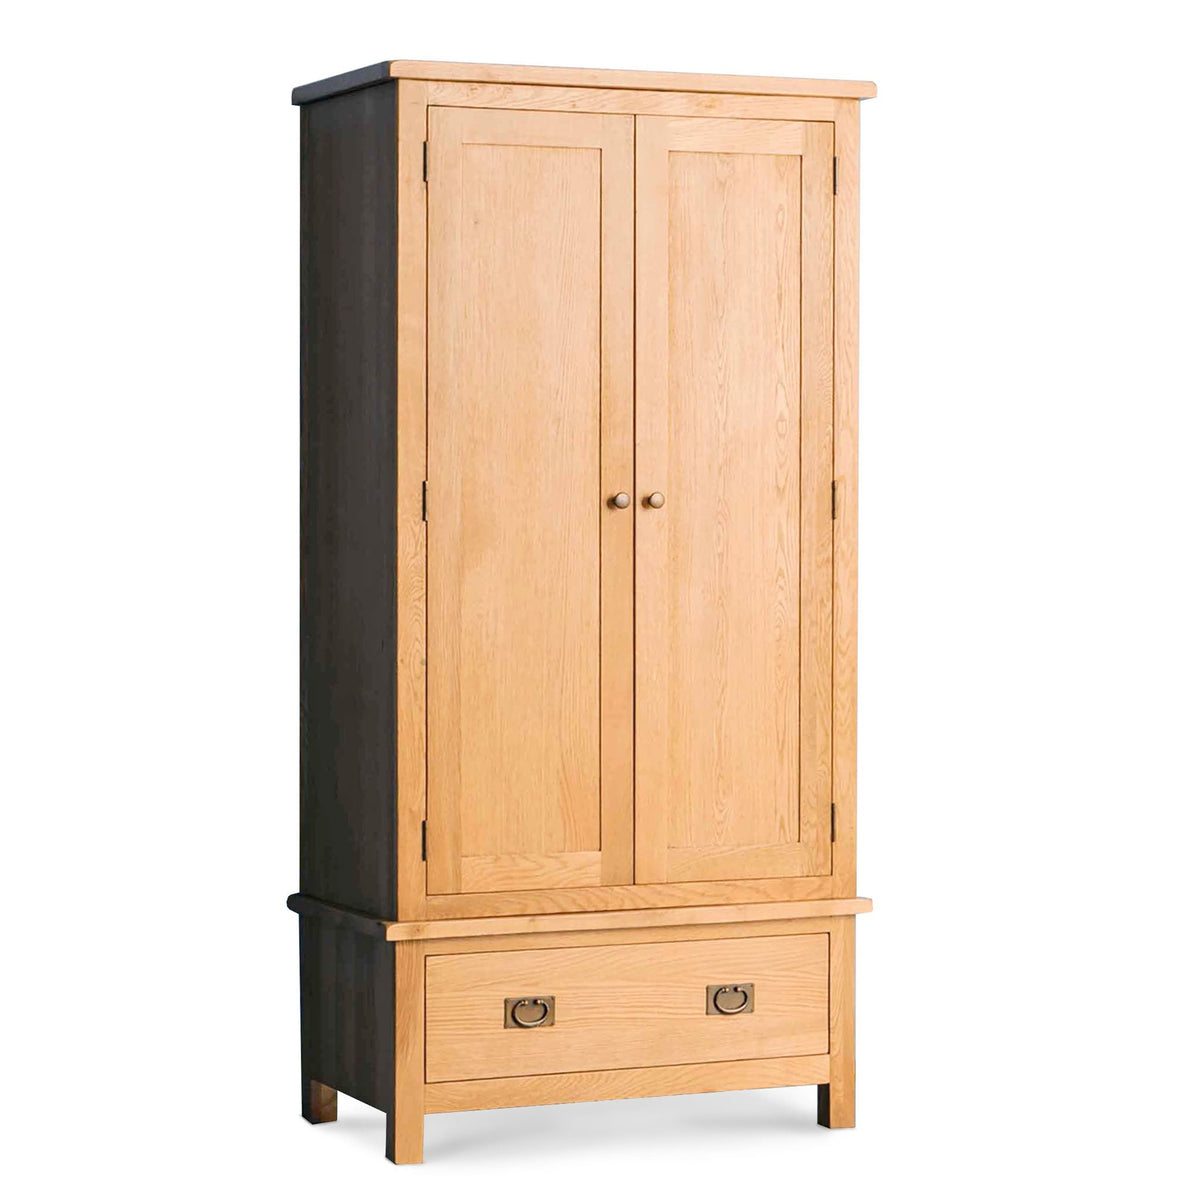 Surrey Oak Double Wardrobe and Drawer by Roseland Furniture